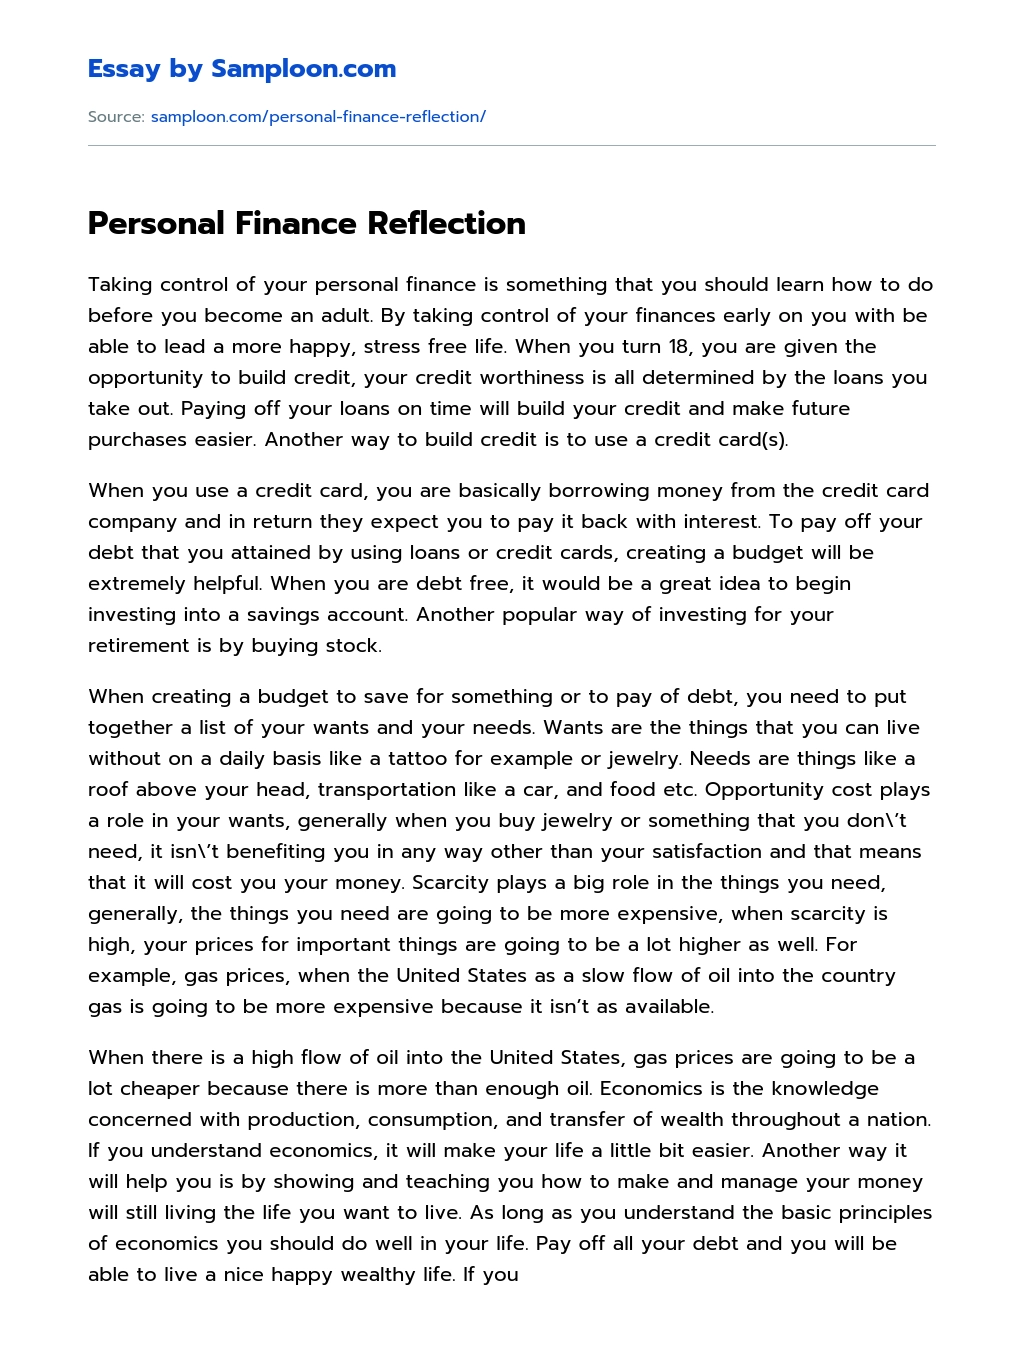 importance of personal finance essay